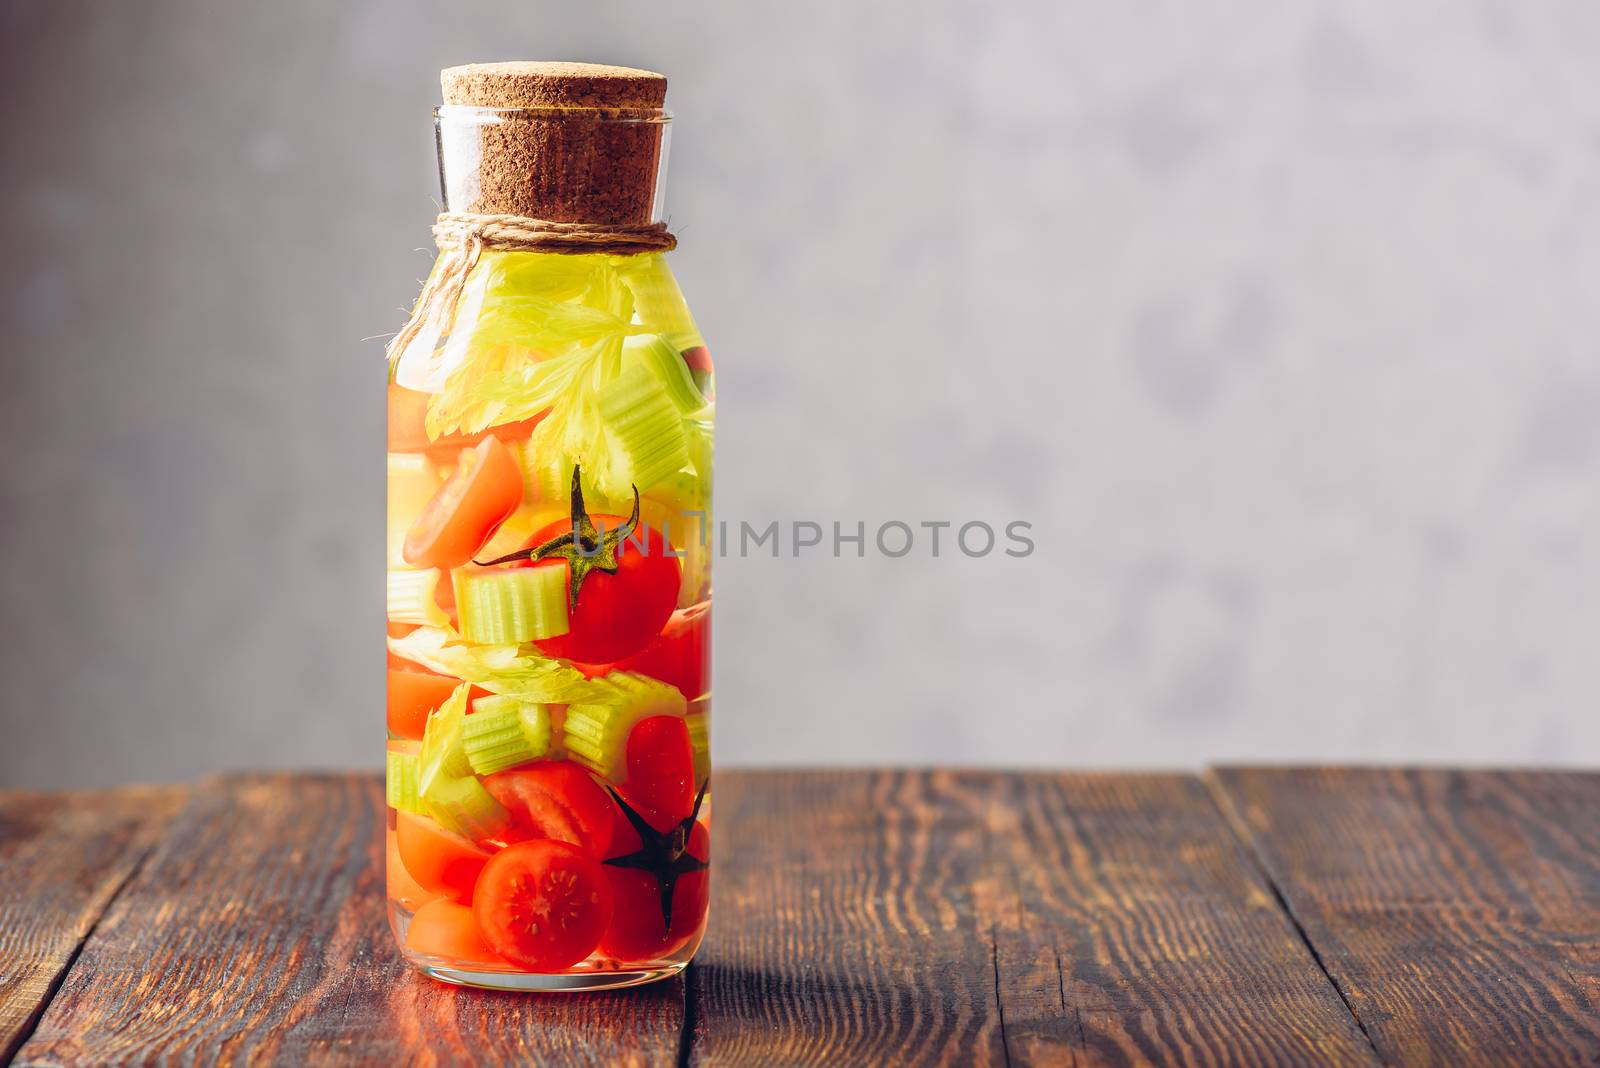 Bottle of Water Infused with Cherry Tomato and Celery Stems. Copy Space on the Right.